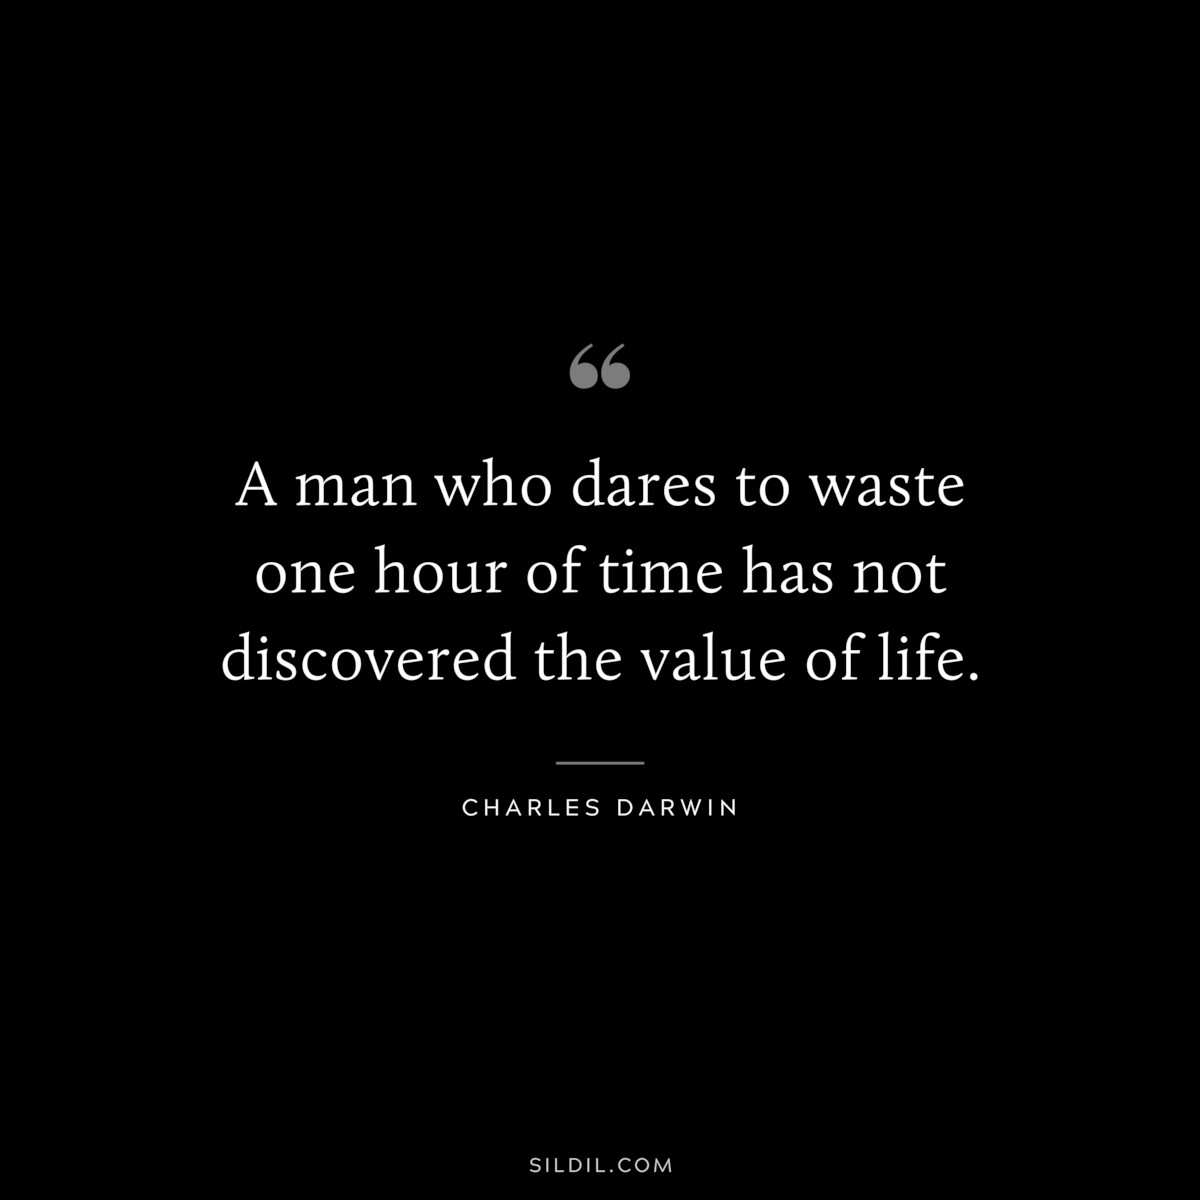 A man who dares to waste one hour of time has not discovered the value of life. ― Charles Darwin